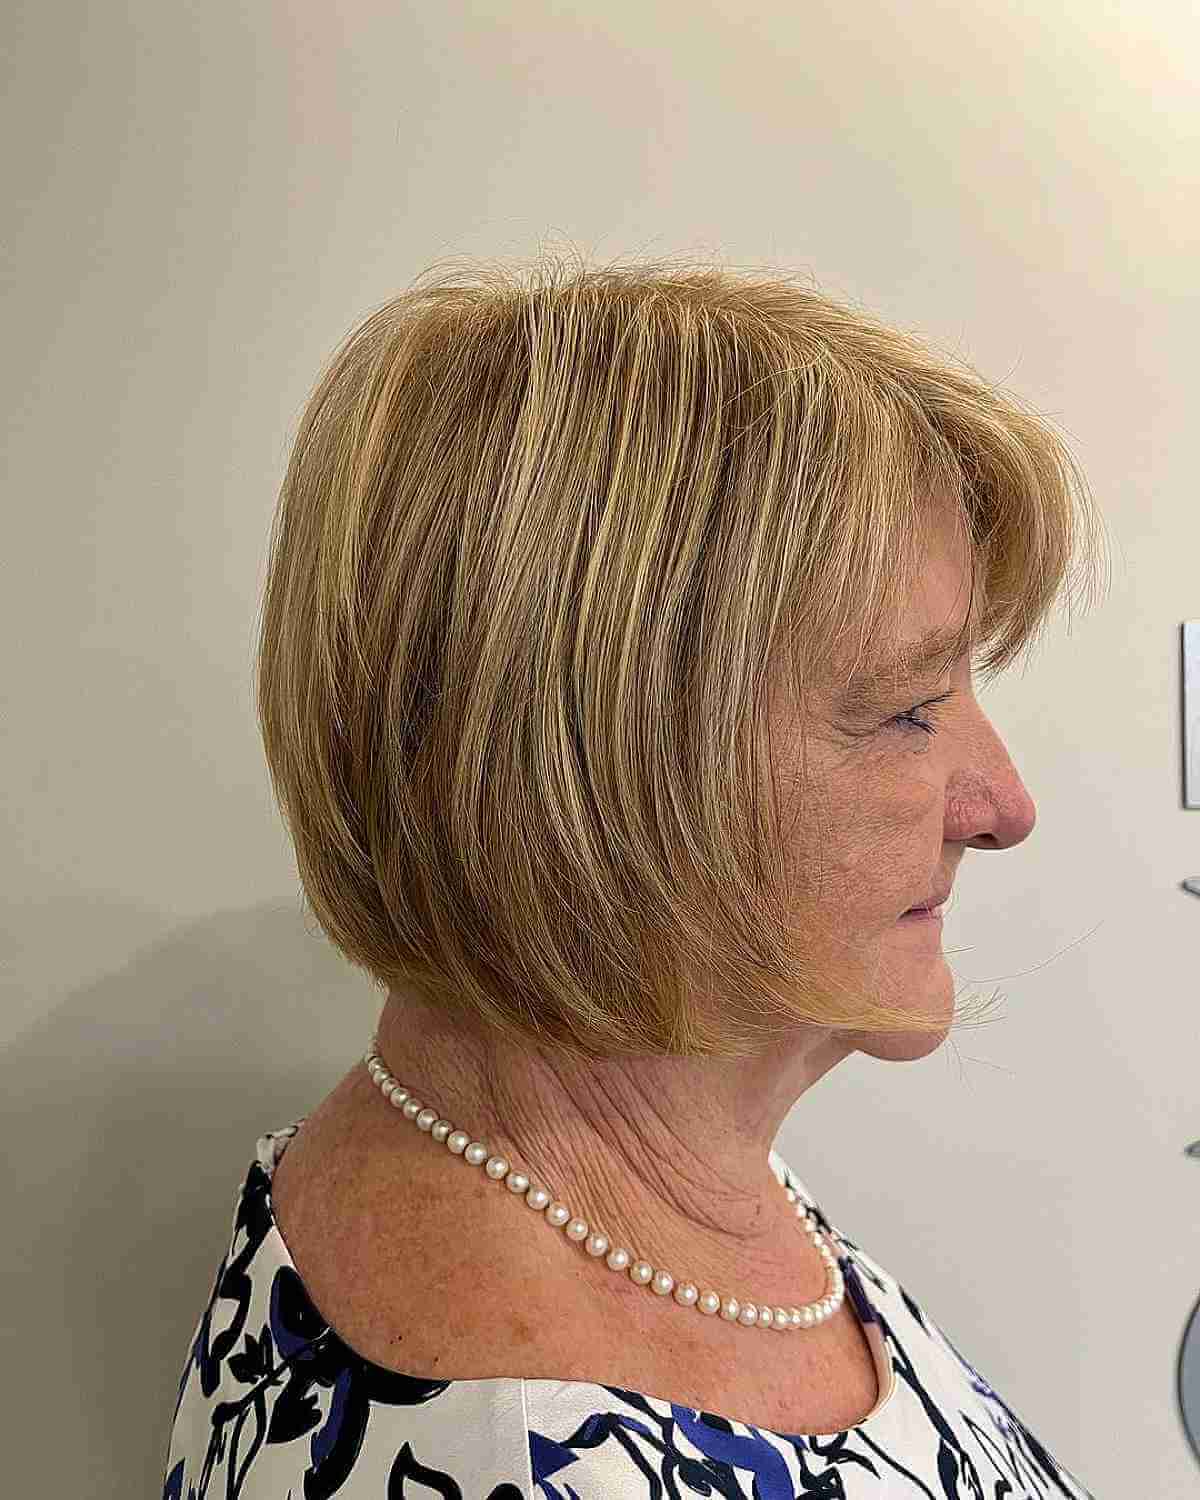 Dirty Blonde Chin-Length Classic Bob Cut for Women in Their 70s